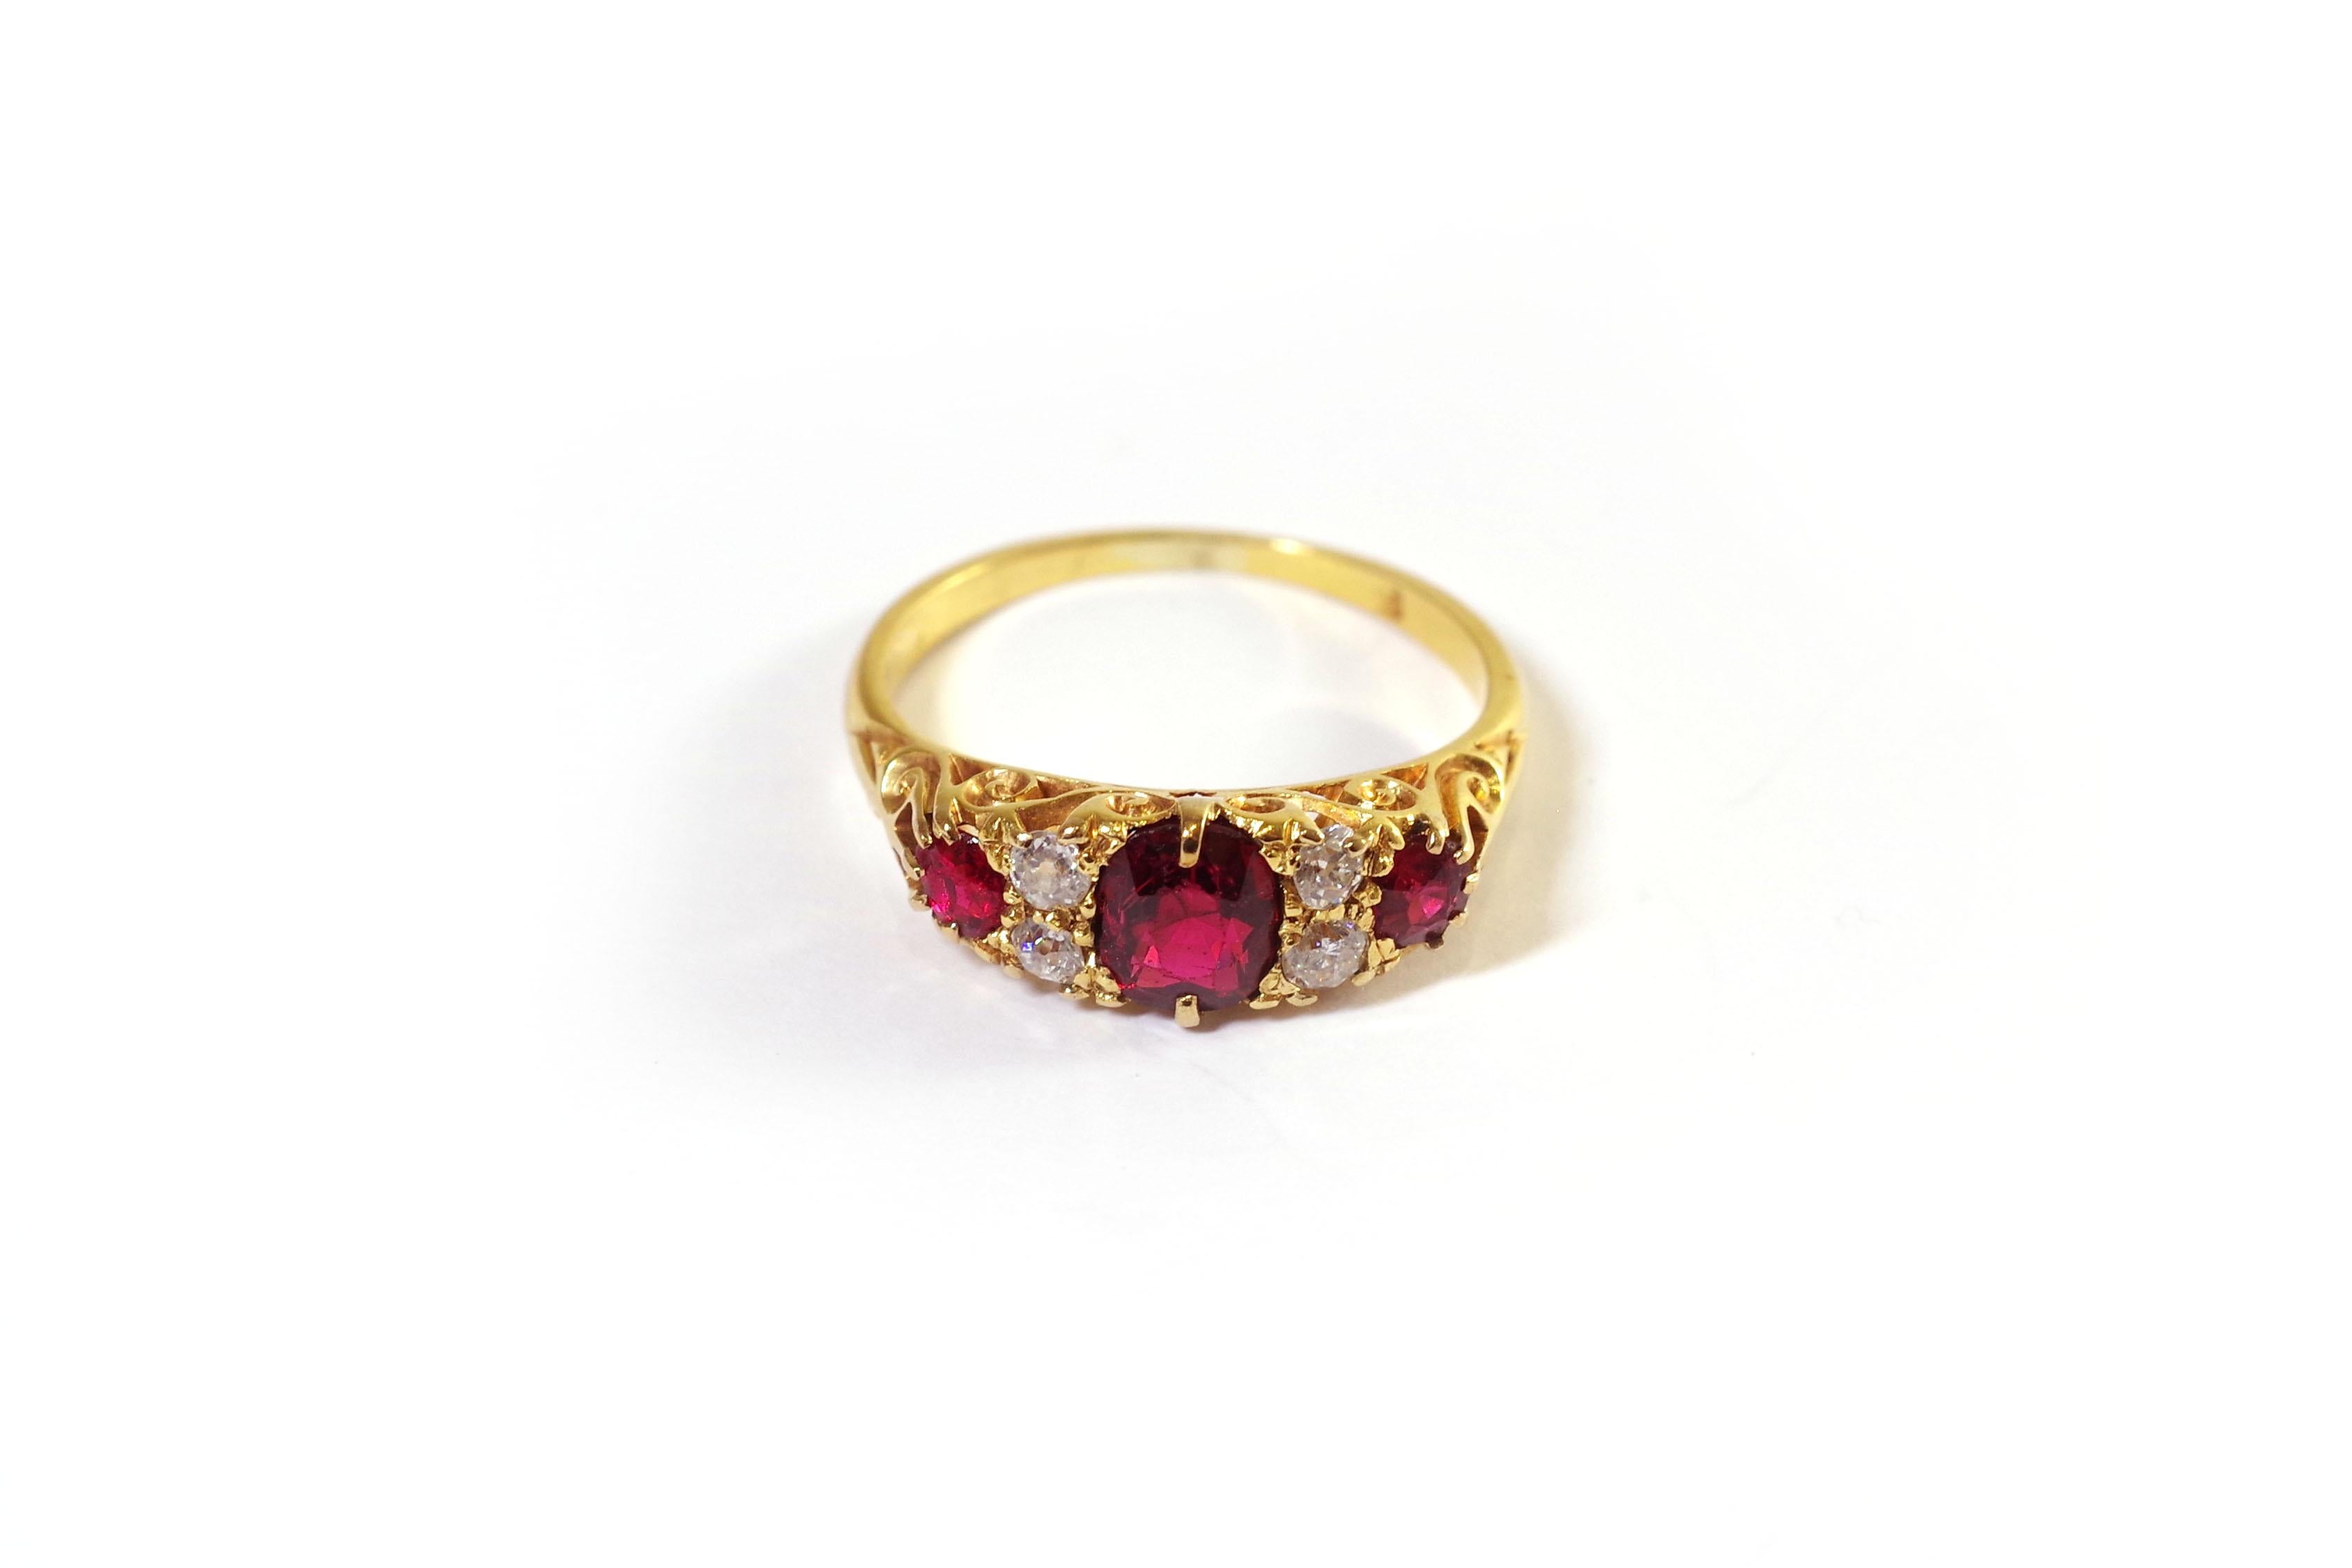 Red spinel trilogy ring 18 karat yellow gold. Three oval spinels adorn the ring, between each spinel are four old cut diamonds. The spinels have a beautiful dark red colour. The ring is finely chiselled on the gallery and shoulders, with a floral